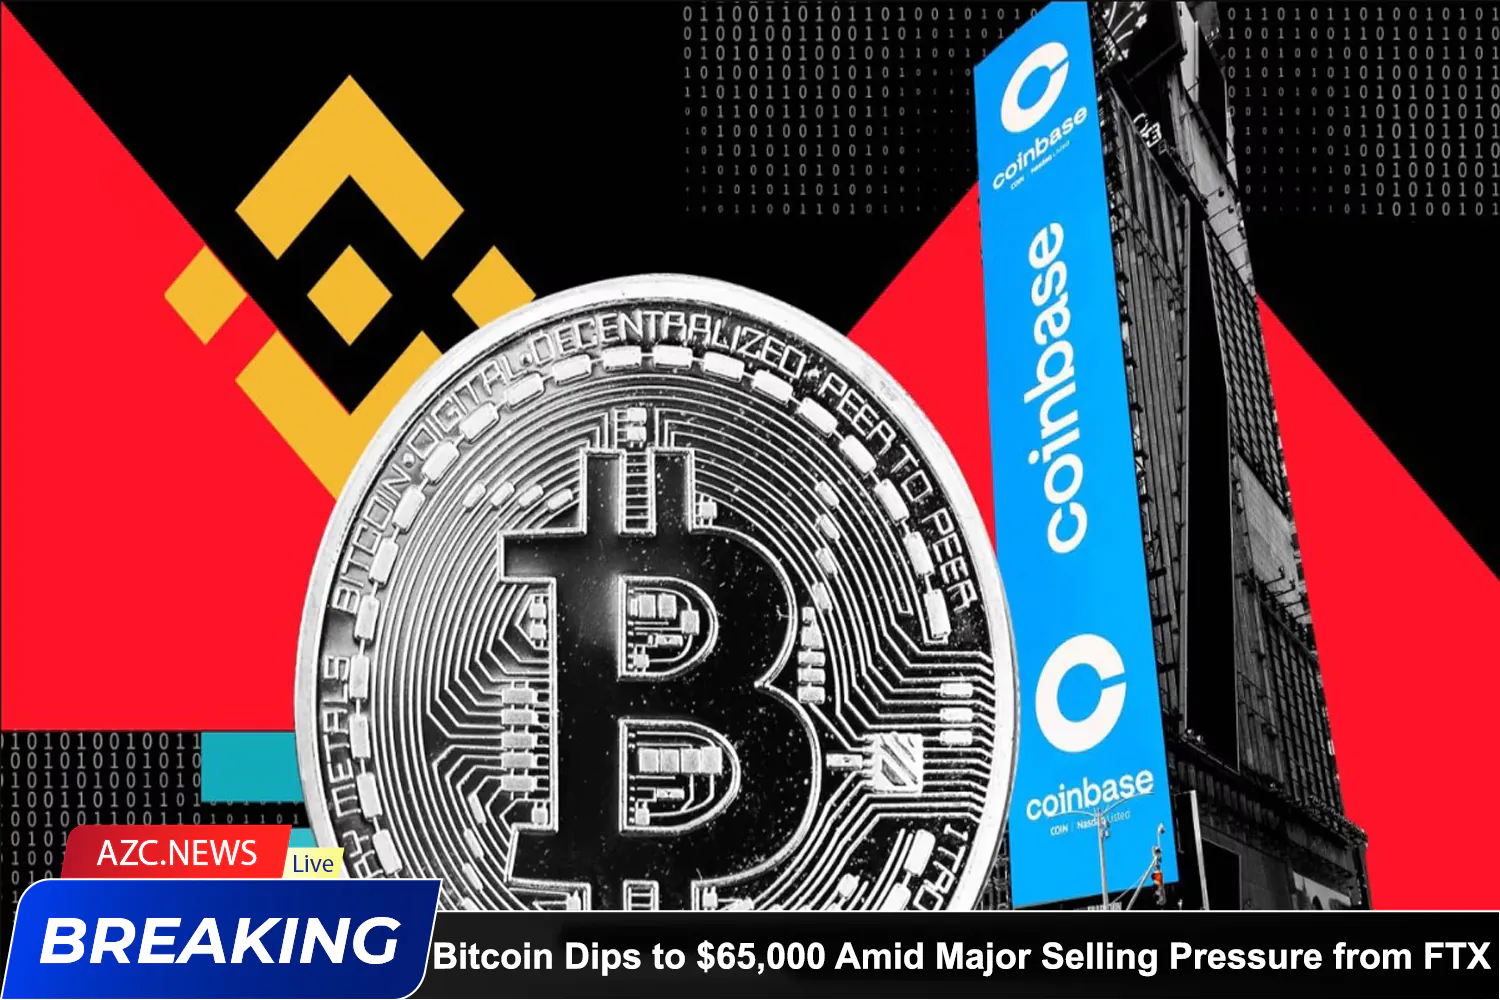 Azcnews Recovered Bitcoin Dips To $65,000 Amid Major Selling Pressure From Ftx